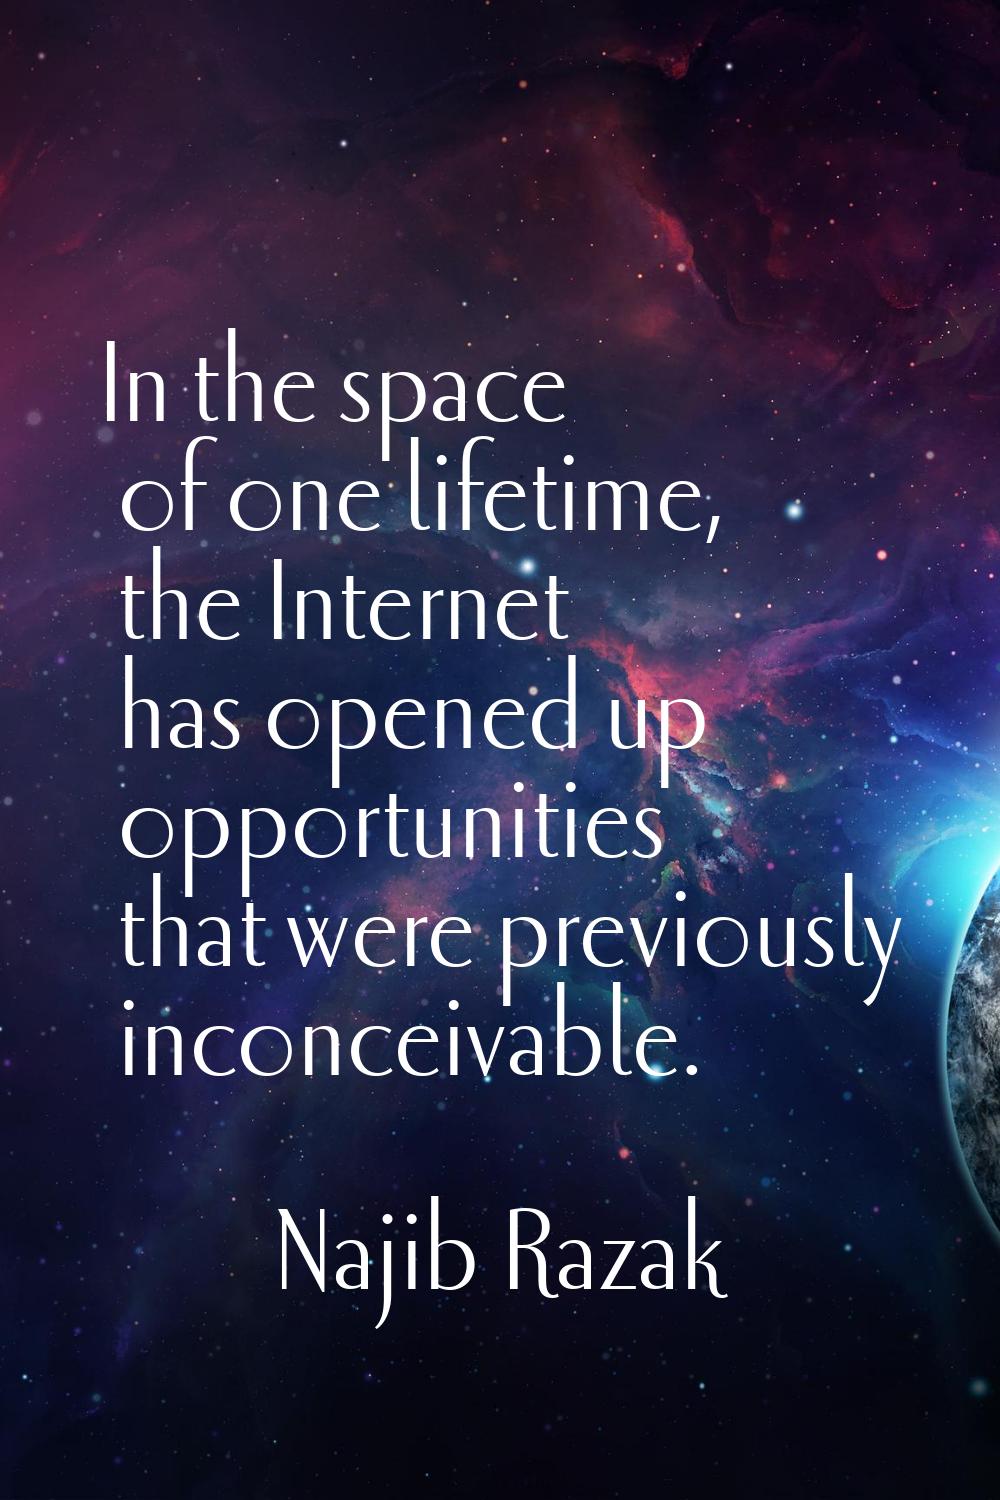 In the space of one lifetime, the Internet has opened up opportunities that were previously inconce